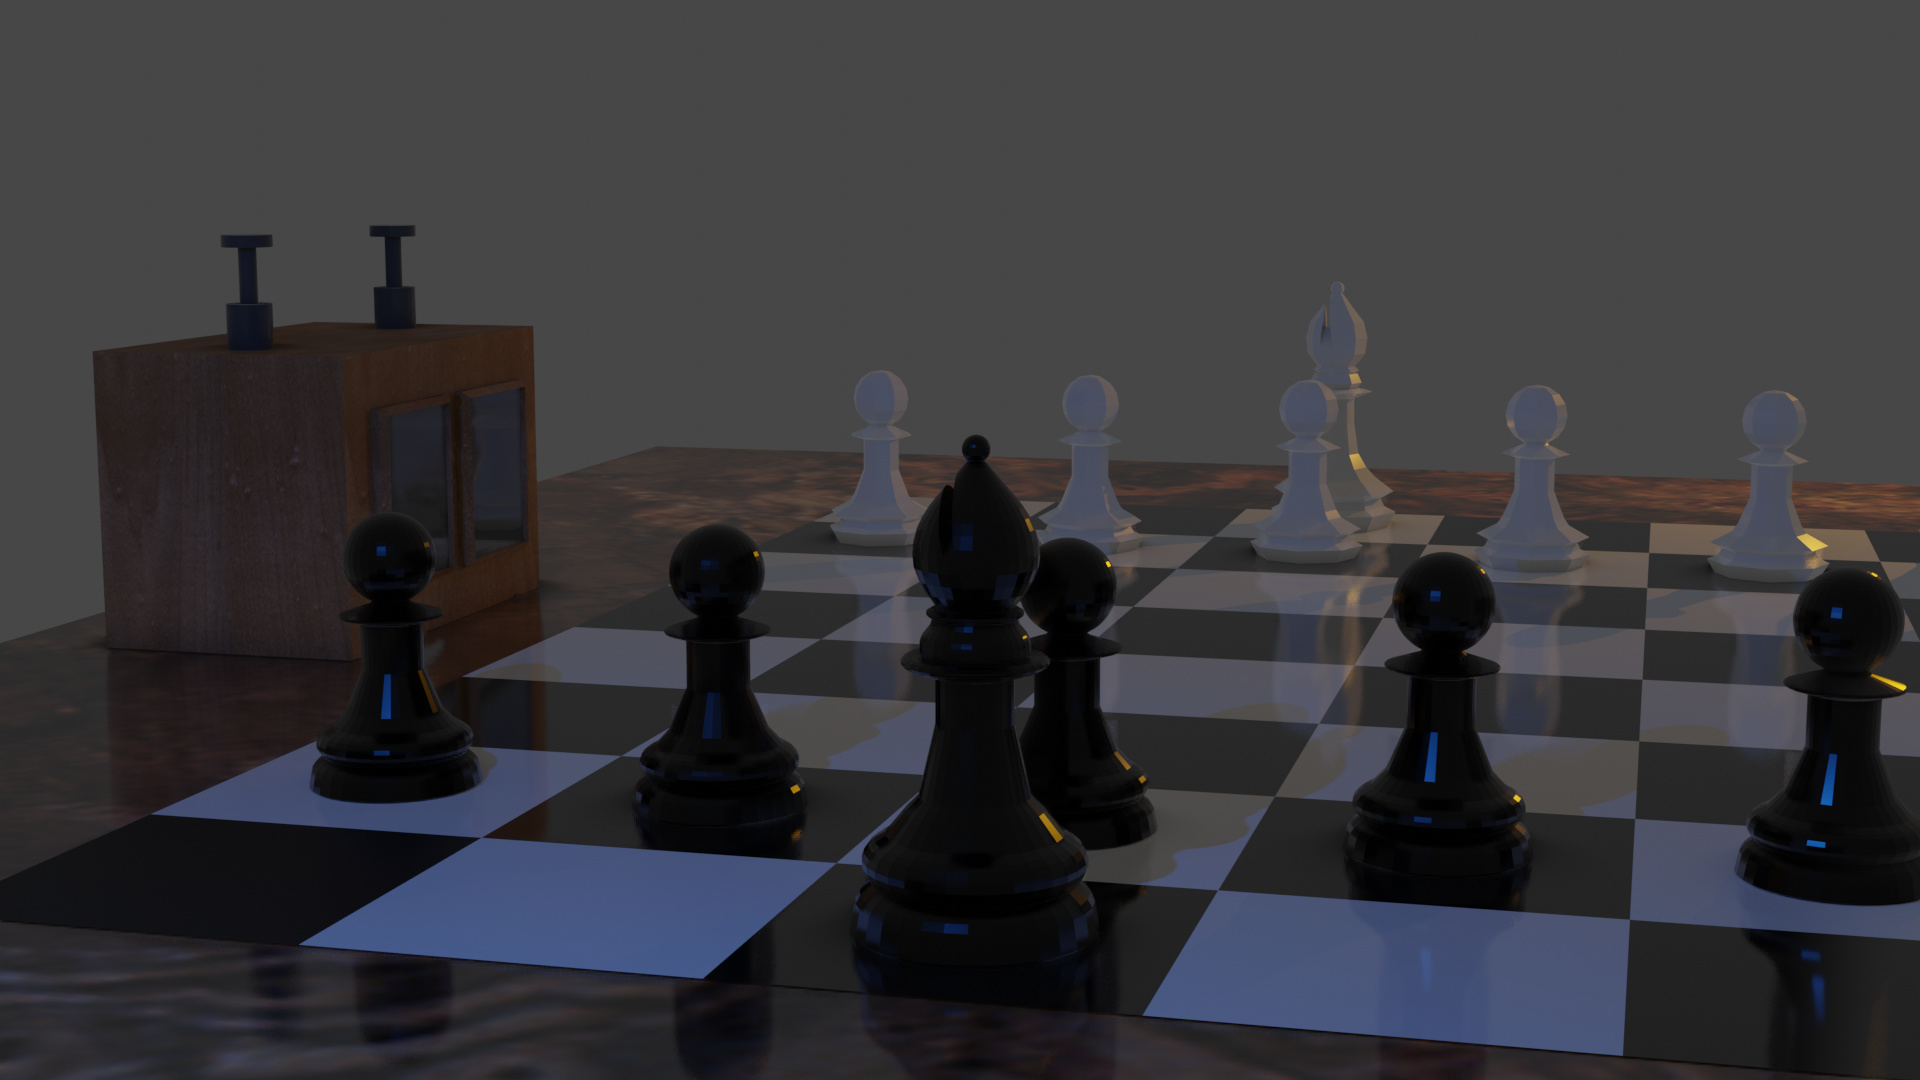 Chess board + wooden texture - Show - GameDev.tv